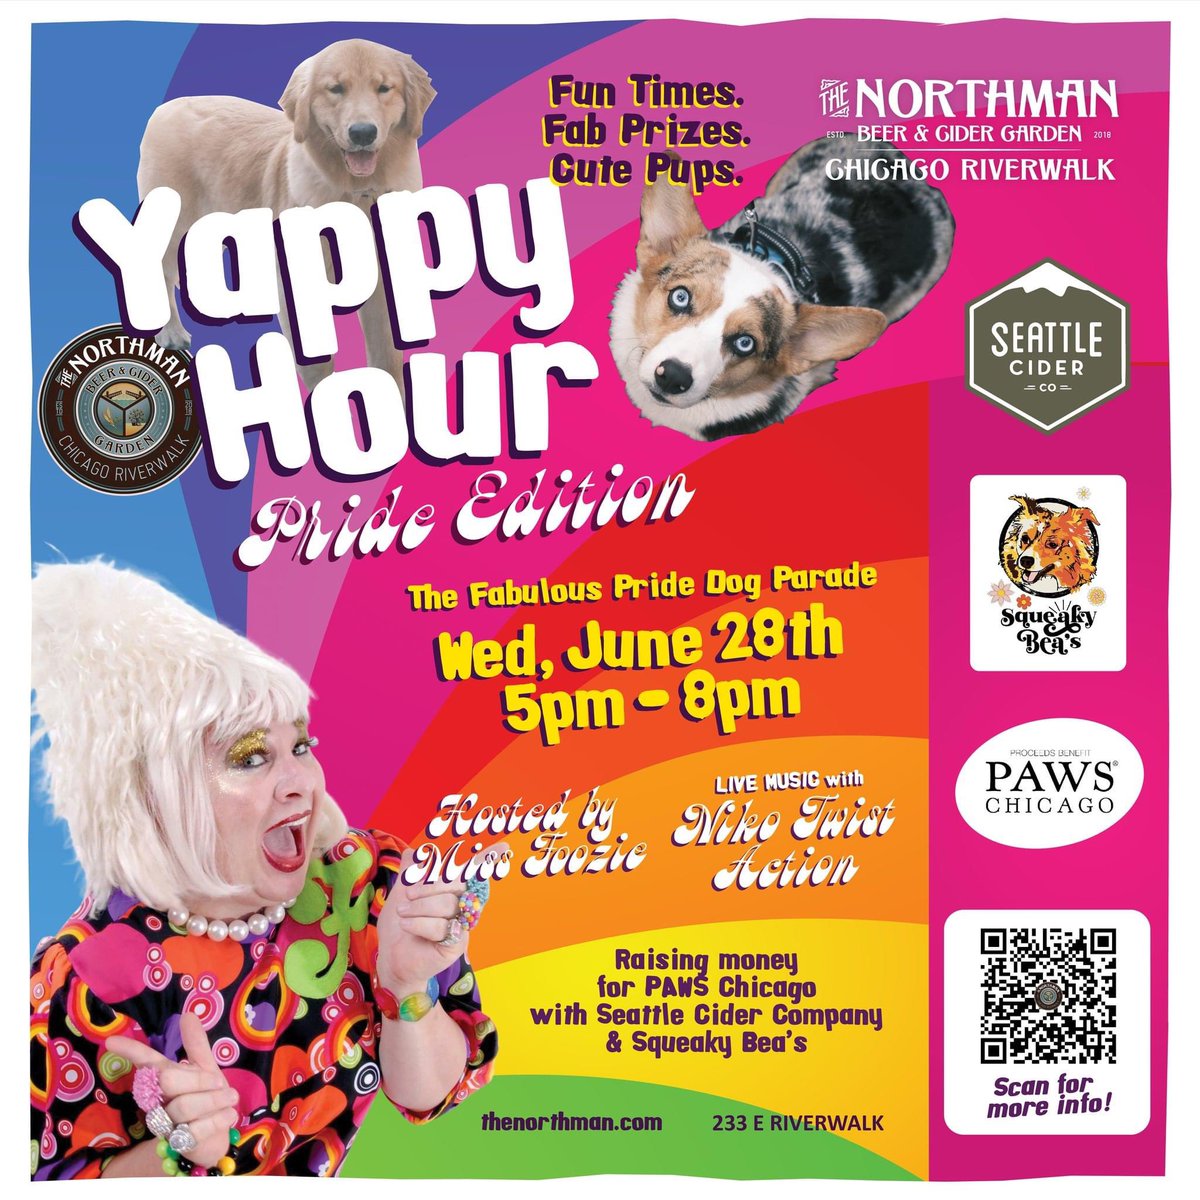 Happy #Pride #Chicago! Make sure u save a little gas in ur tank after the celebs this wknd & join us for Weds #YappyHour Launch Party! It's our 2nd annual #Puppy #PrideParade /@MissFoozie & #livemusic w/ @nikotwistaction, we can't wait! Full deets here > bit.ly/3r0UBPx